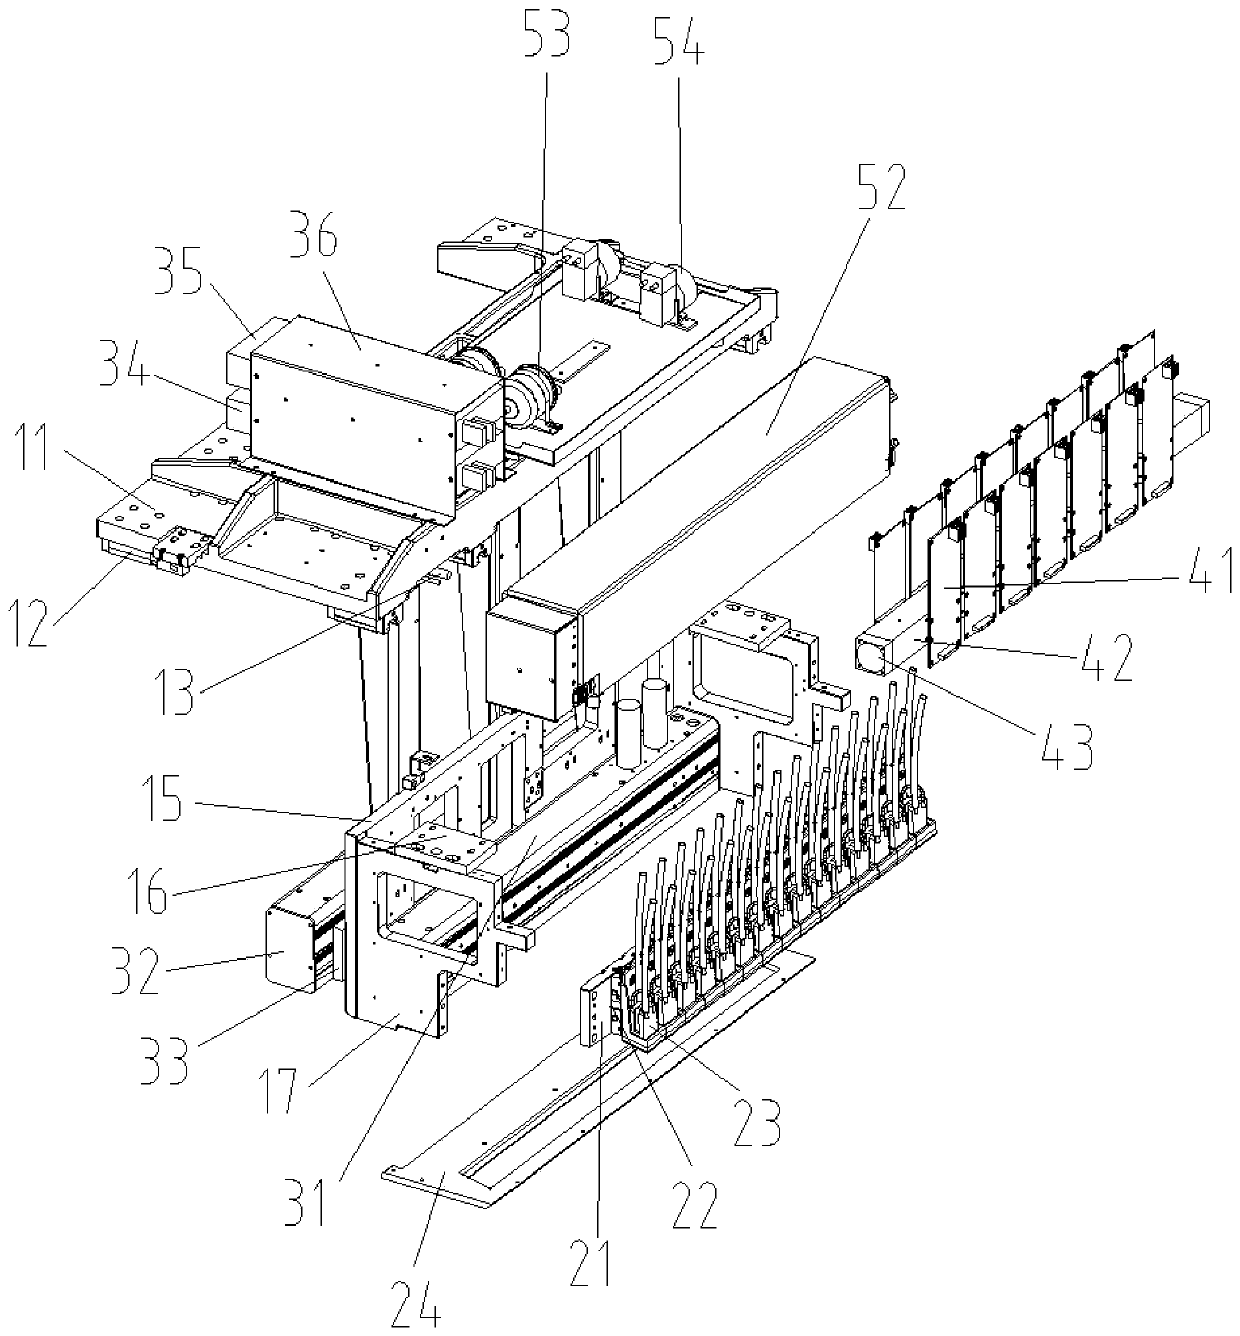 Ink-jet printing trolley and ink-jet printing device